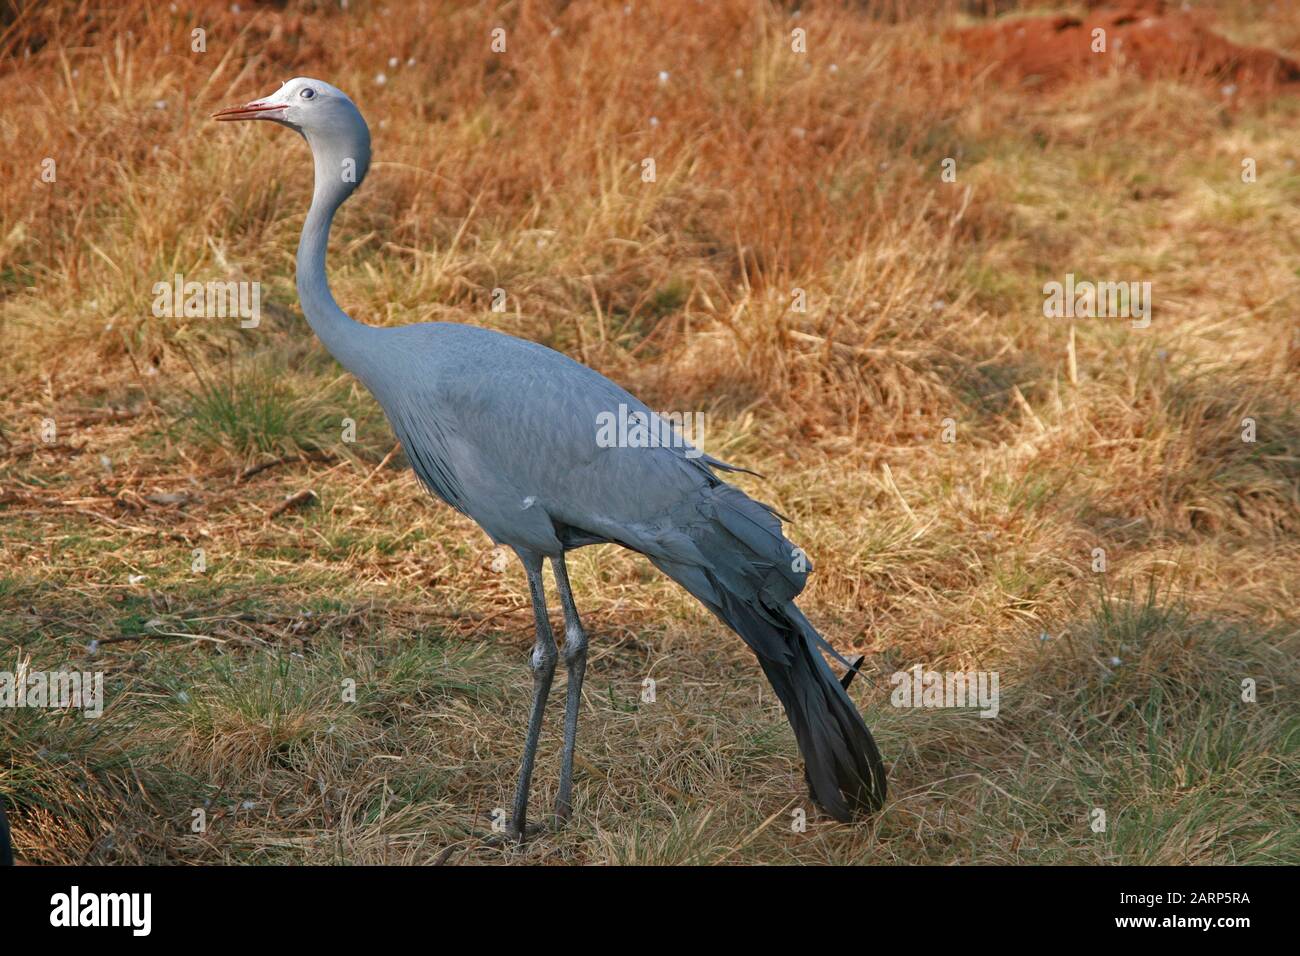 Blue crane at Lion and Rhino Park Nature Reserve, Kromdraai, Krugersdorp, West Rand, Gauteng Province, South Africa. Stock Photo